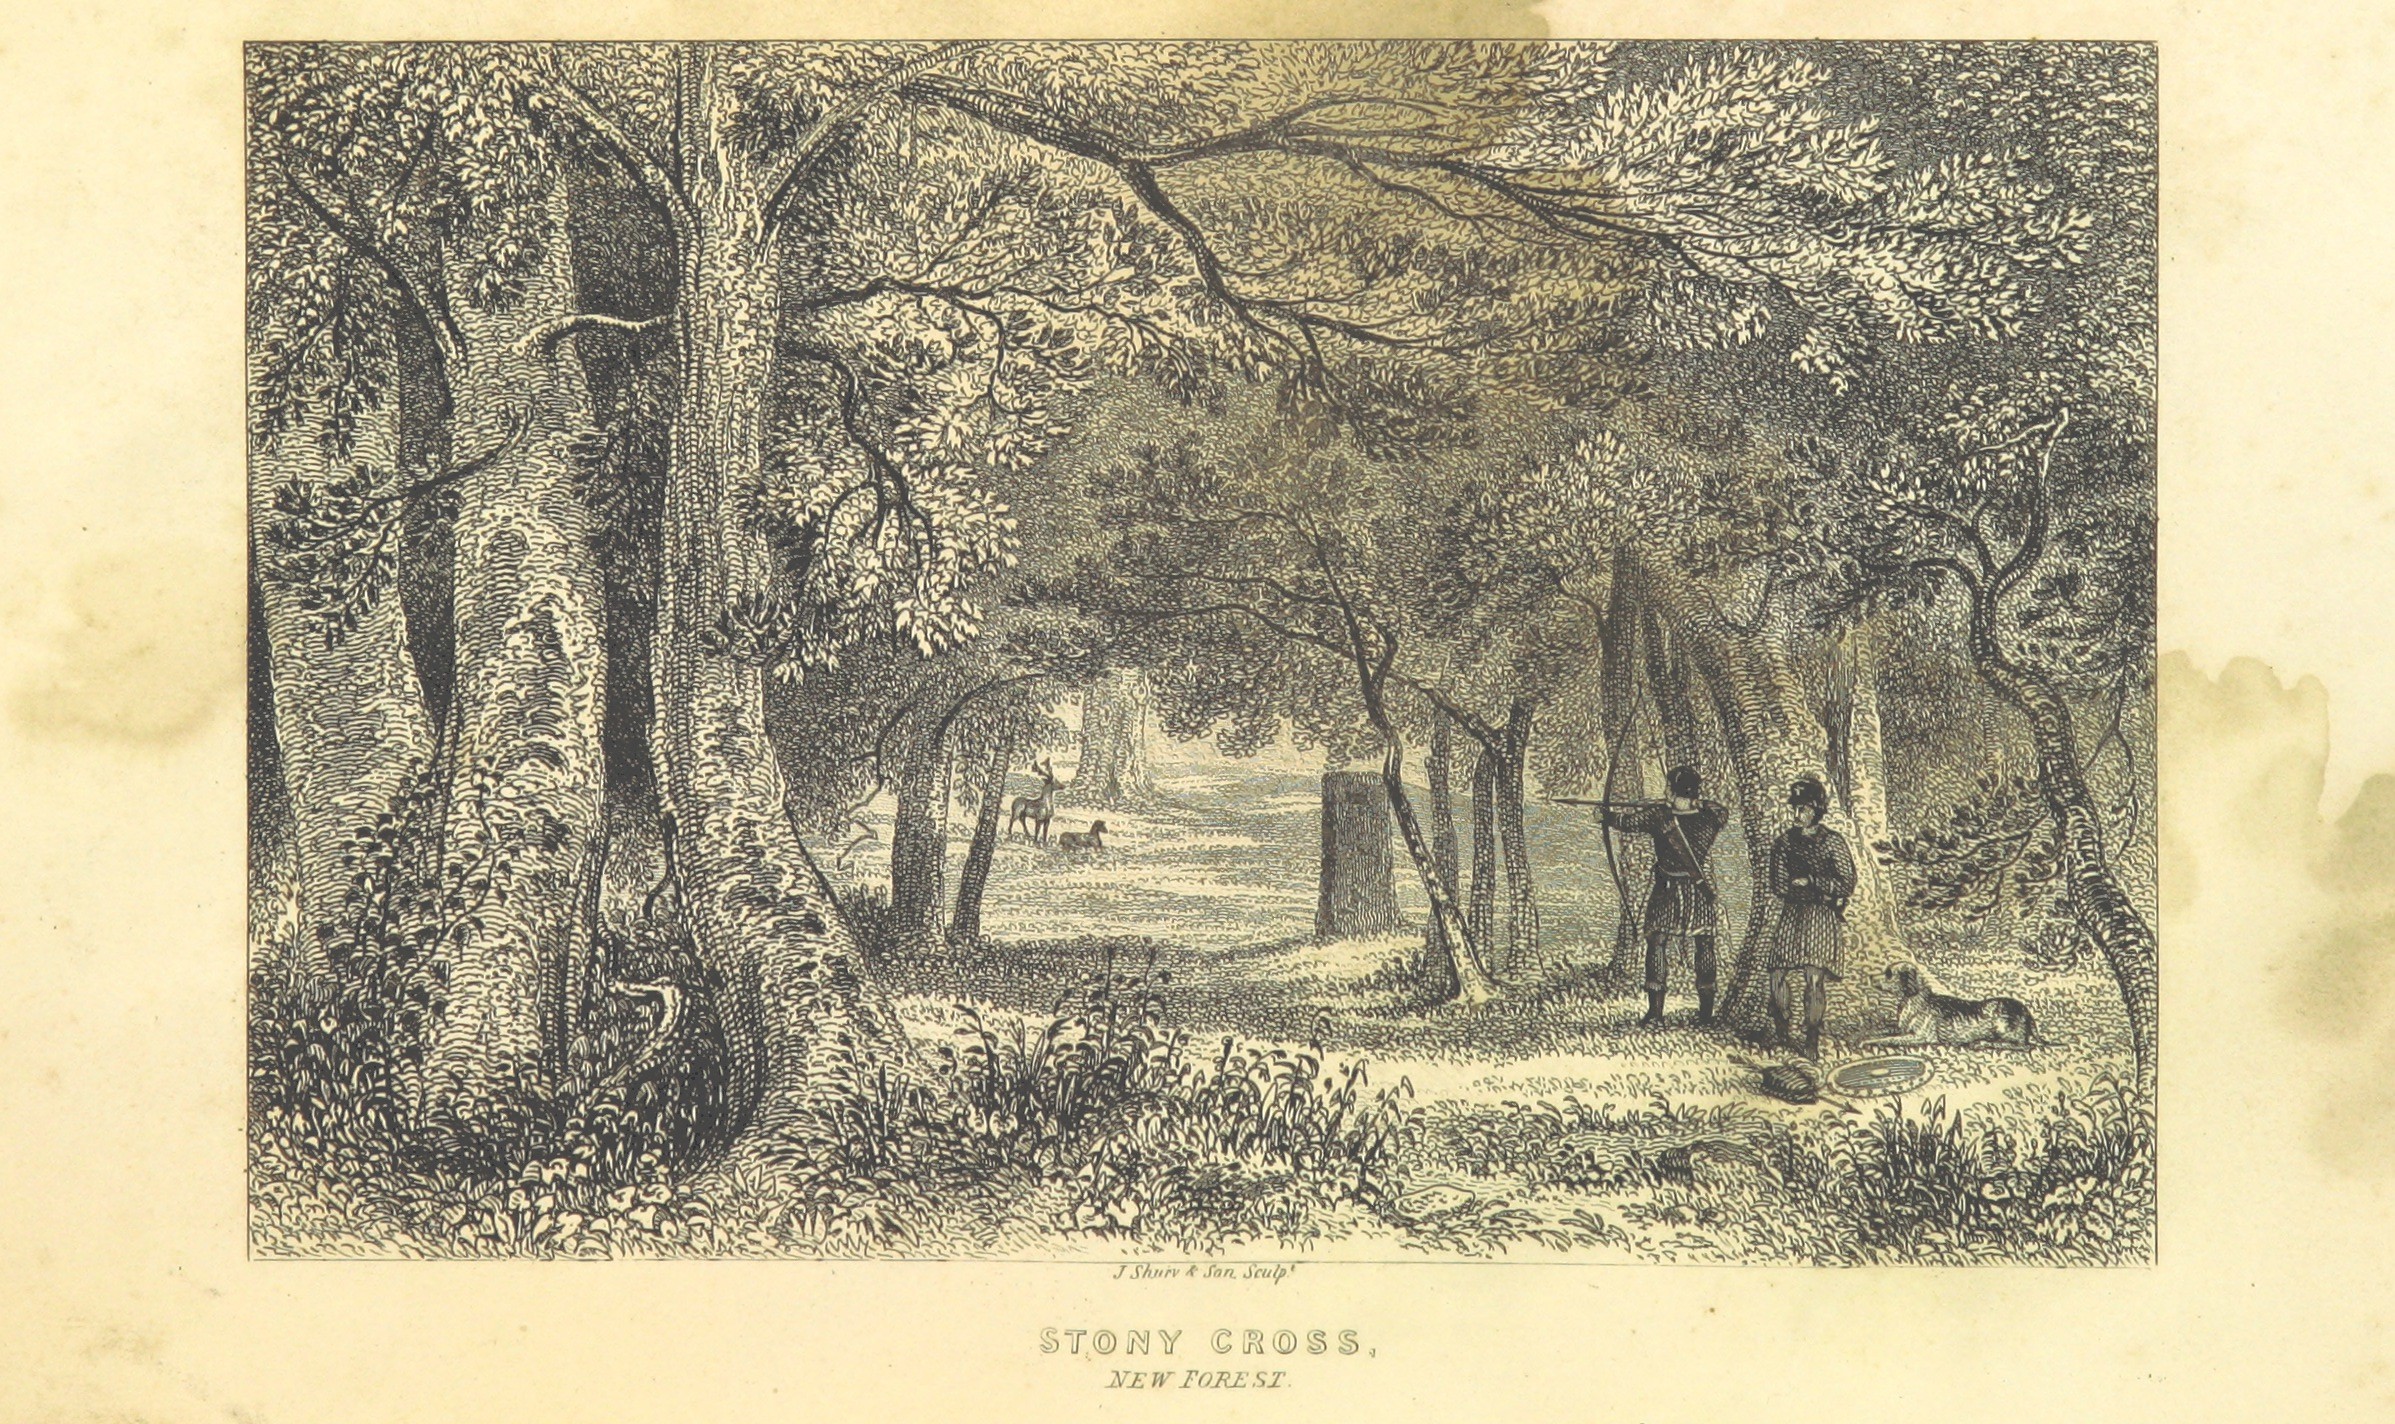 Engraving depicting two hunters and their dog with a pair of deer standing in the background